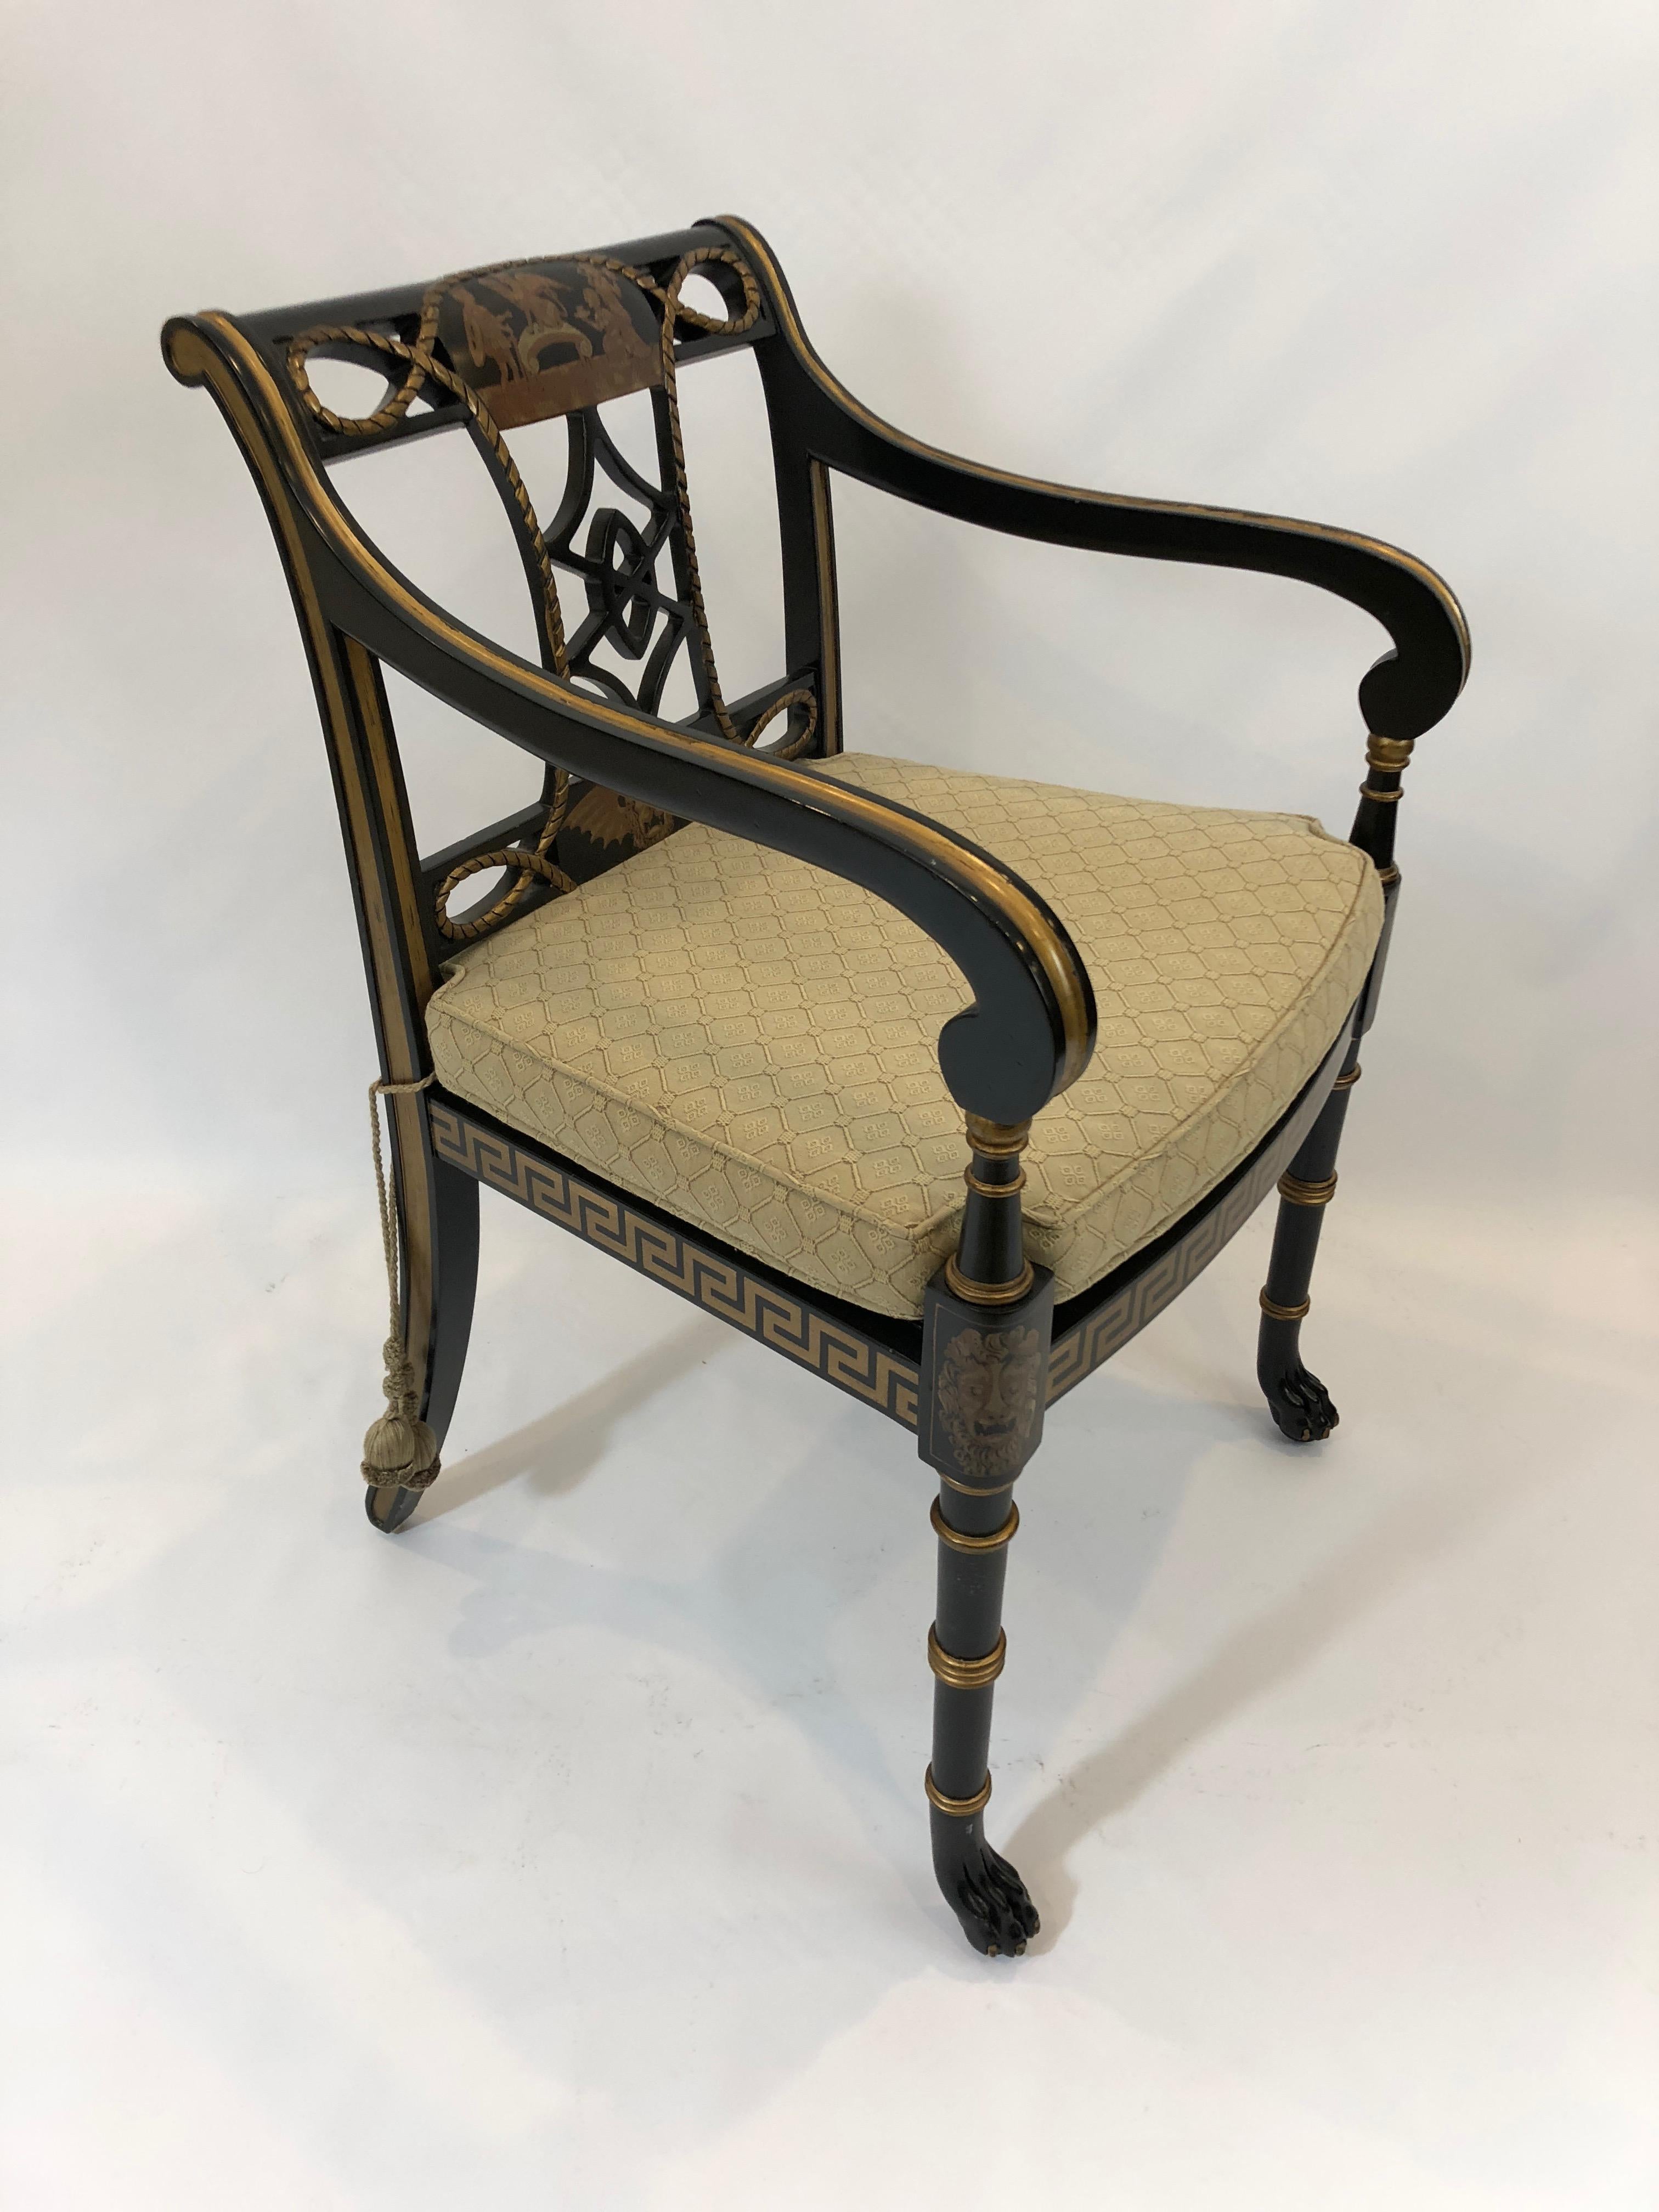 Our favorite glamorous chair in any room, a black and gold Regency style painted armchair having sensational Greek key motif, lion heads, and other adornments painted in gold with an elegantly designed open back, caned seat, and custom cushion in a